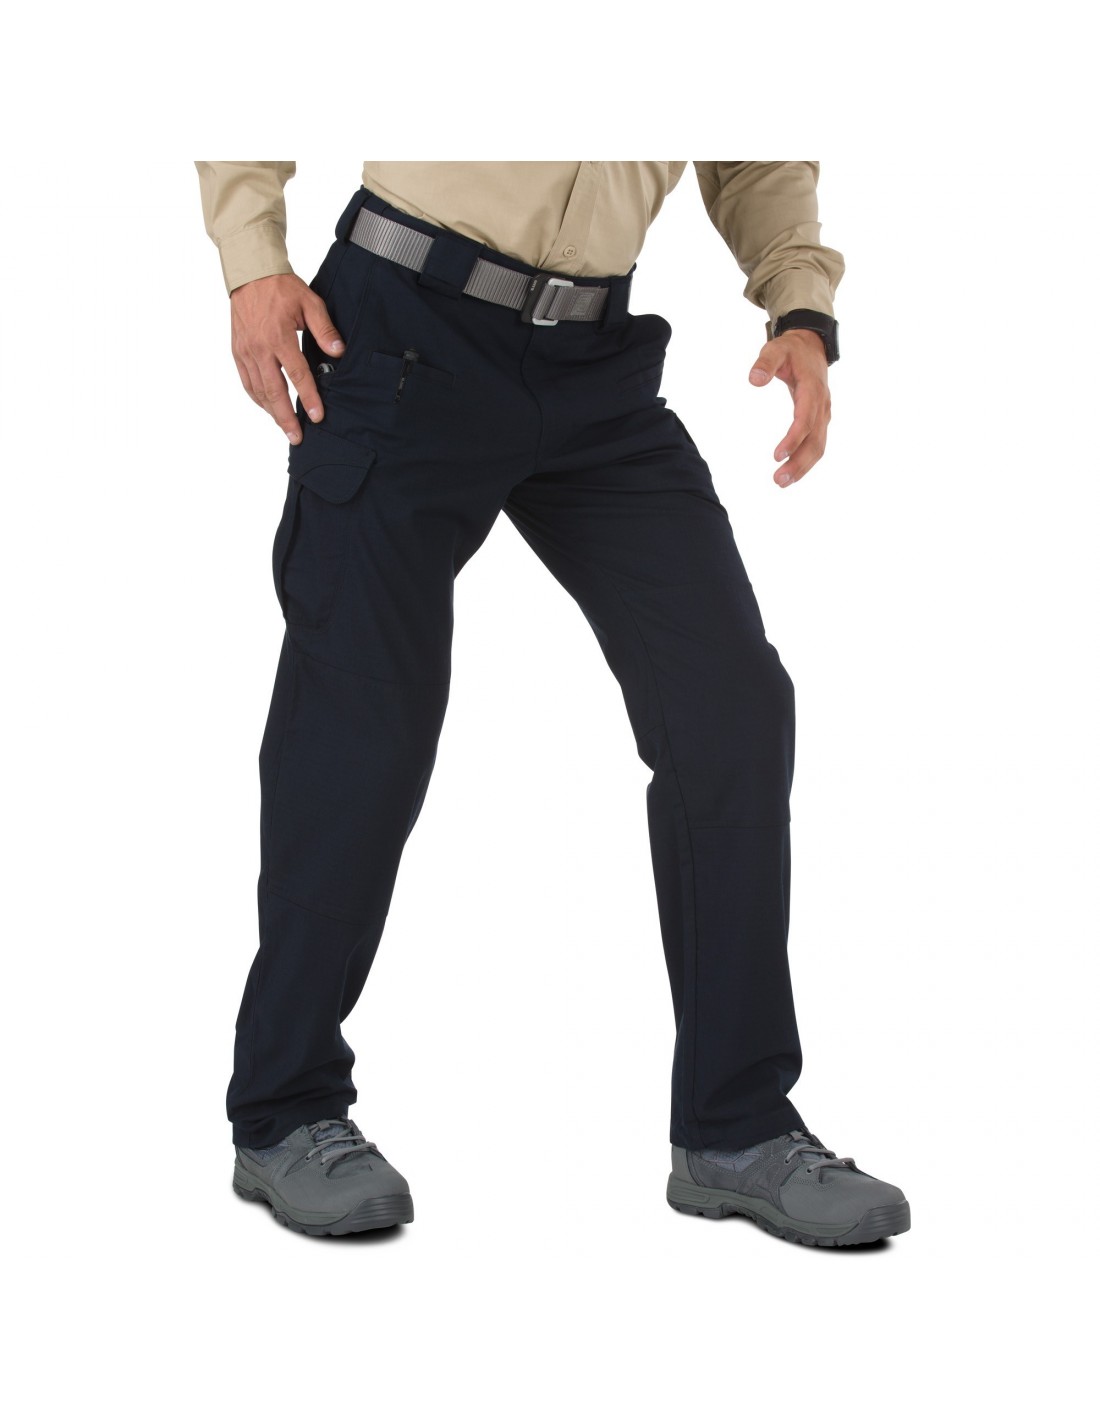 MedTree  511 Quantum TEMS Trousers Now IN STOCK Its here the  longawaited 511 Quantum TEMS Green EMS Trousers for UK Paramedics and EMS  workers Constructed with three distinct stretch fabrics for